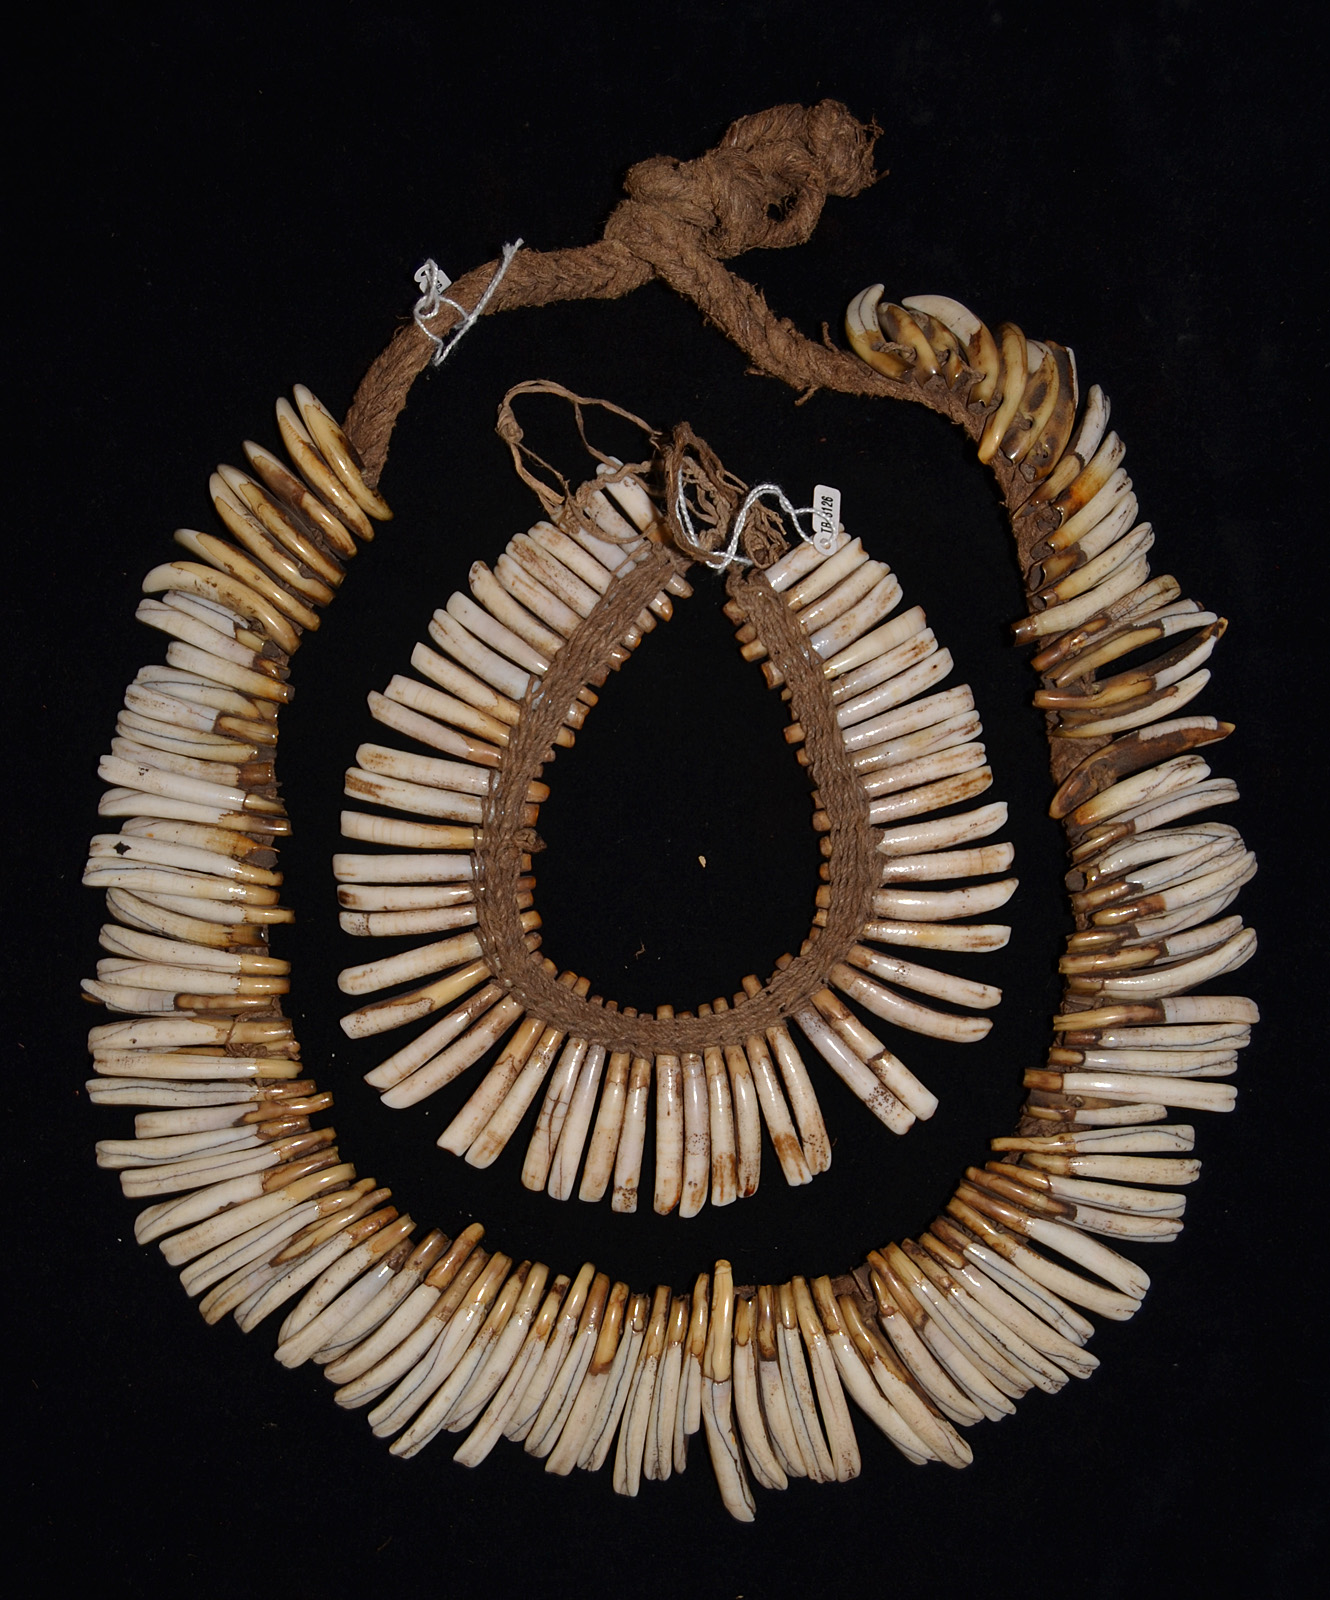 Two Superb Old Pigs Teeth Necklaces From The Eastern Highlands Papua New Guinea